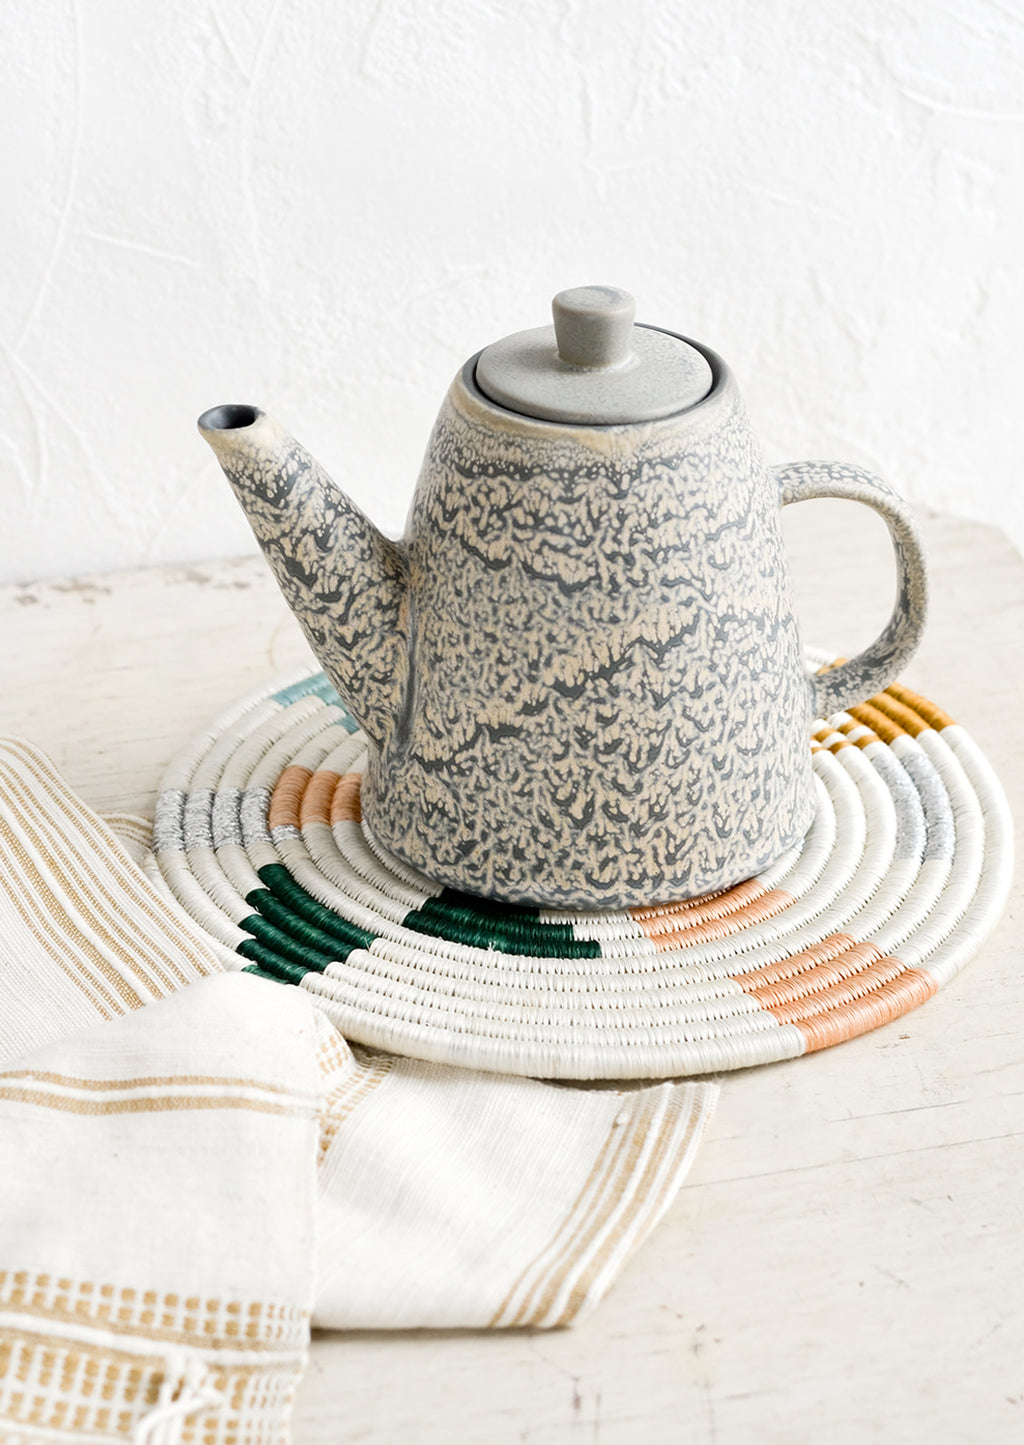 2: A ceramic teapot and white trivet on a table.